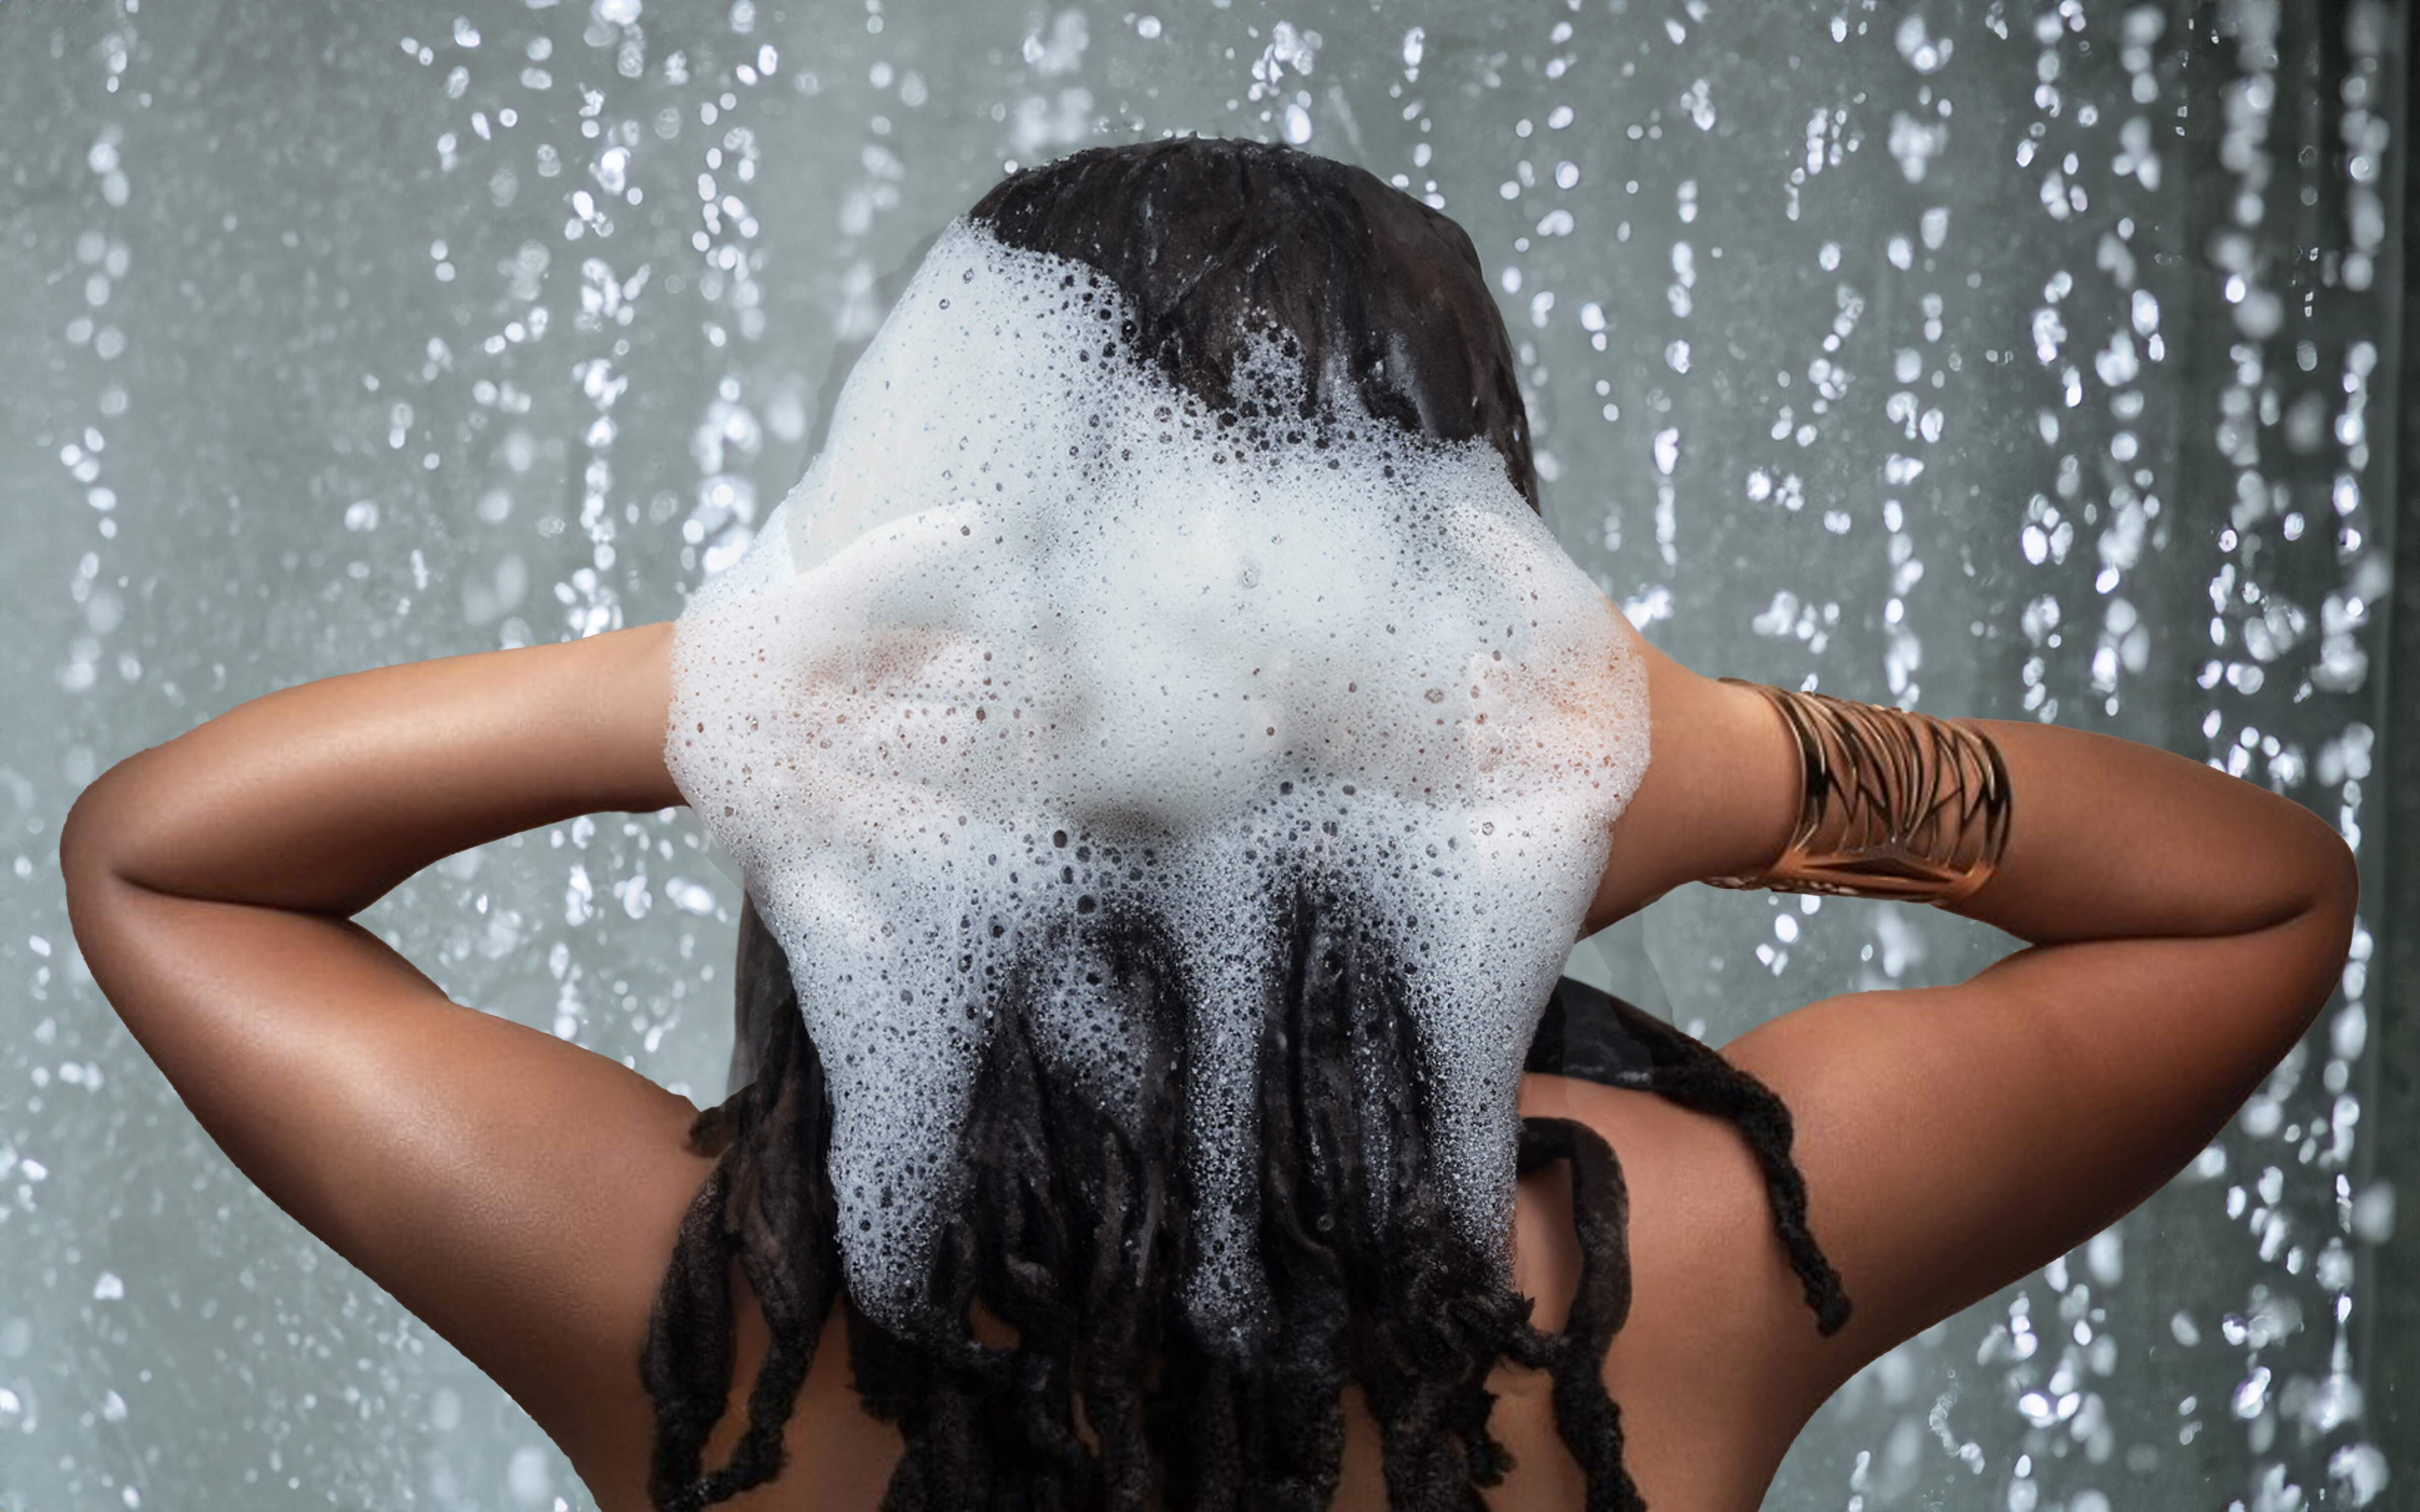 DEBUNKING MYTHS ABOUT WASHING YOUR LOCS